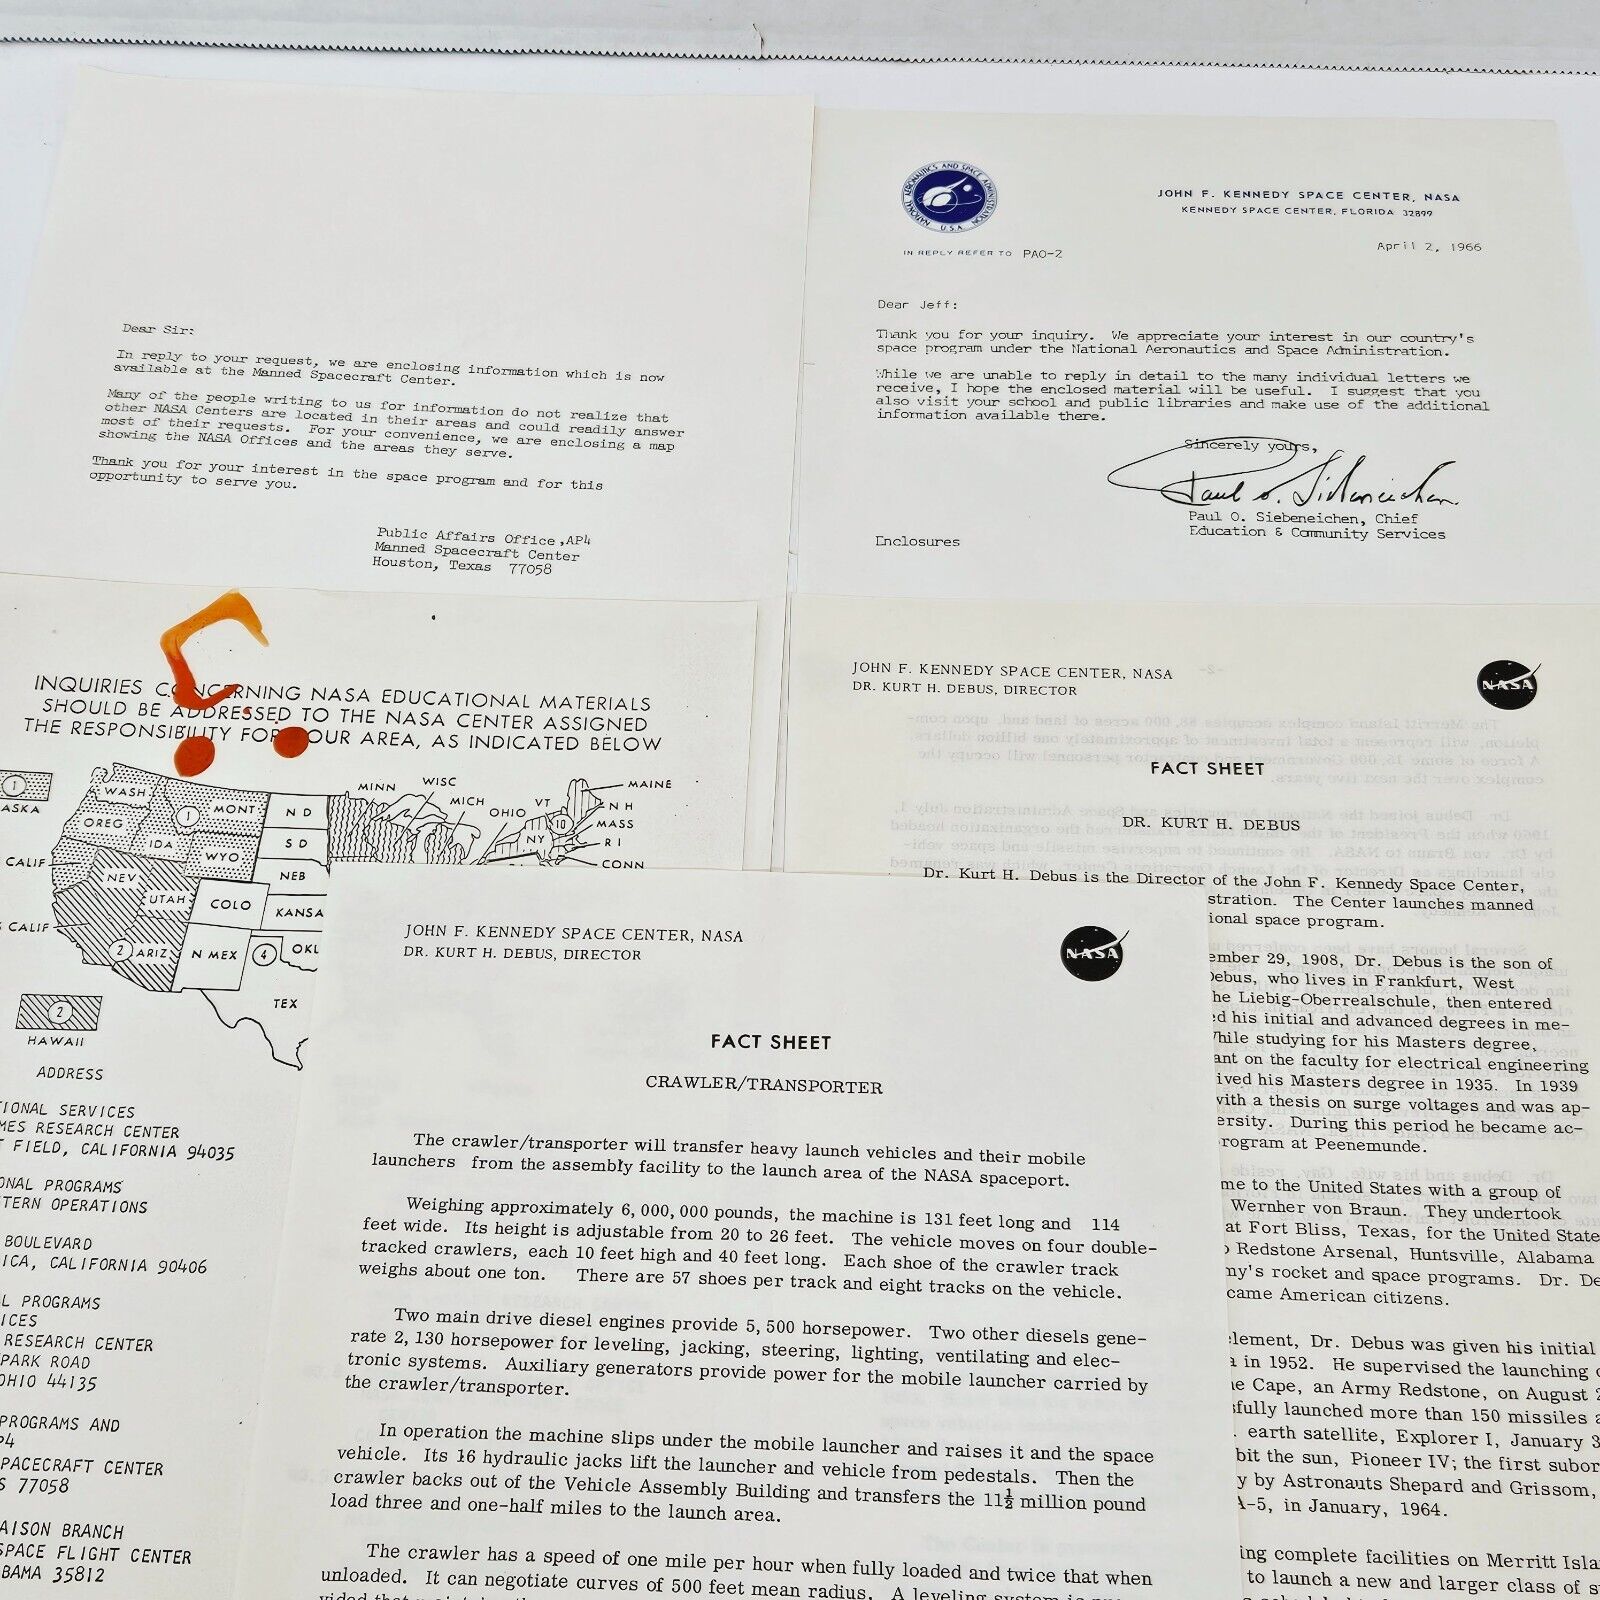 NASA Information Request Response Letters and Fact Sheets 1966 Kennedy Center